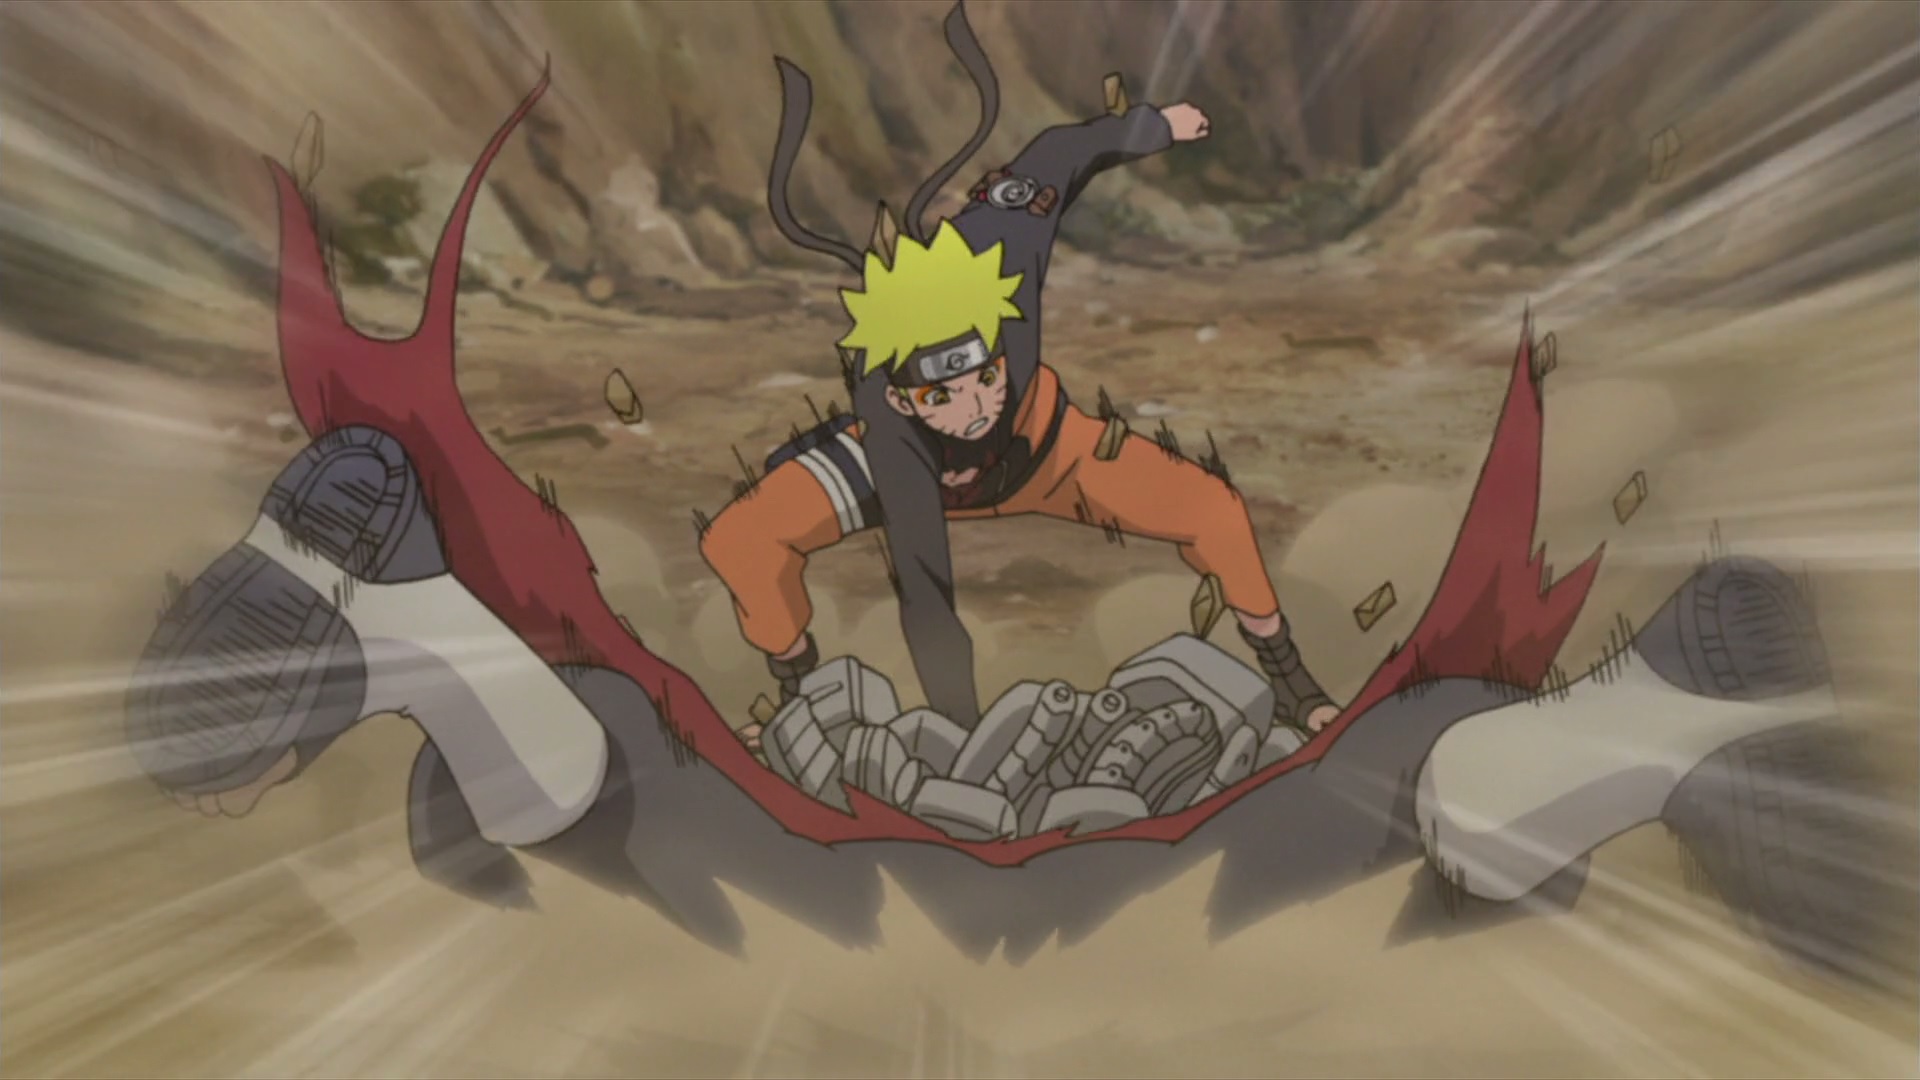 what episodes are the naruto vs pain fight